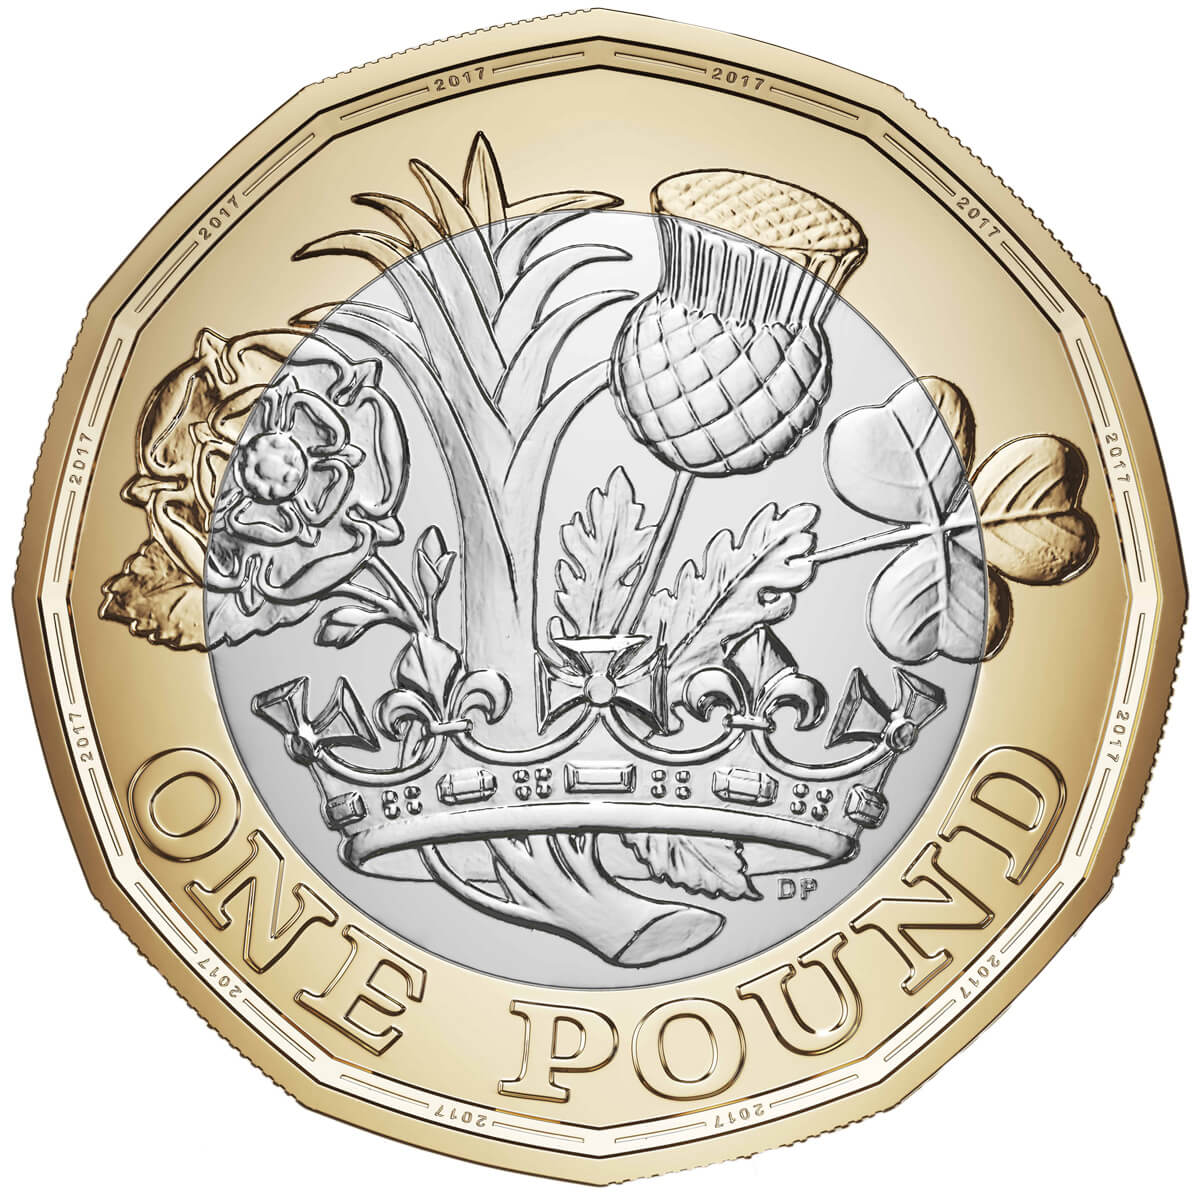 The new pound coin